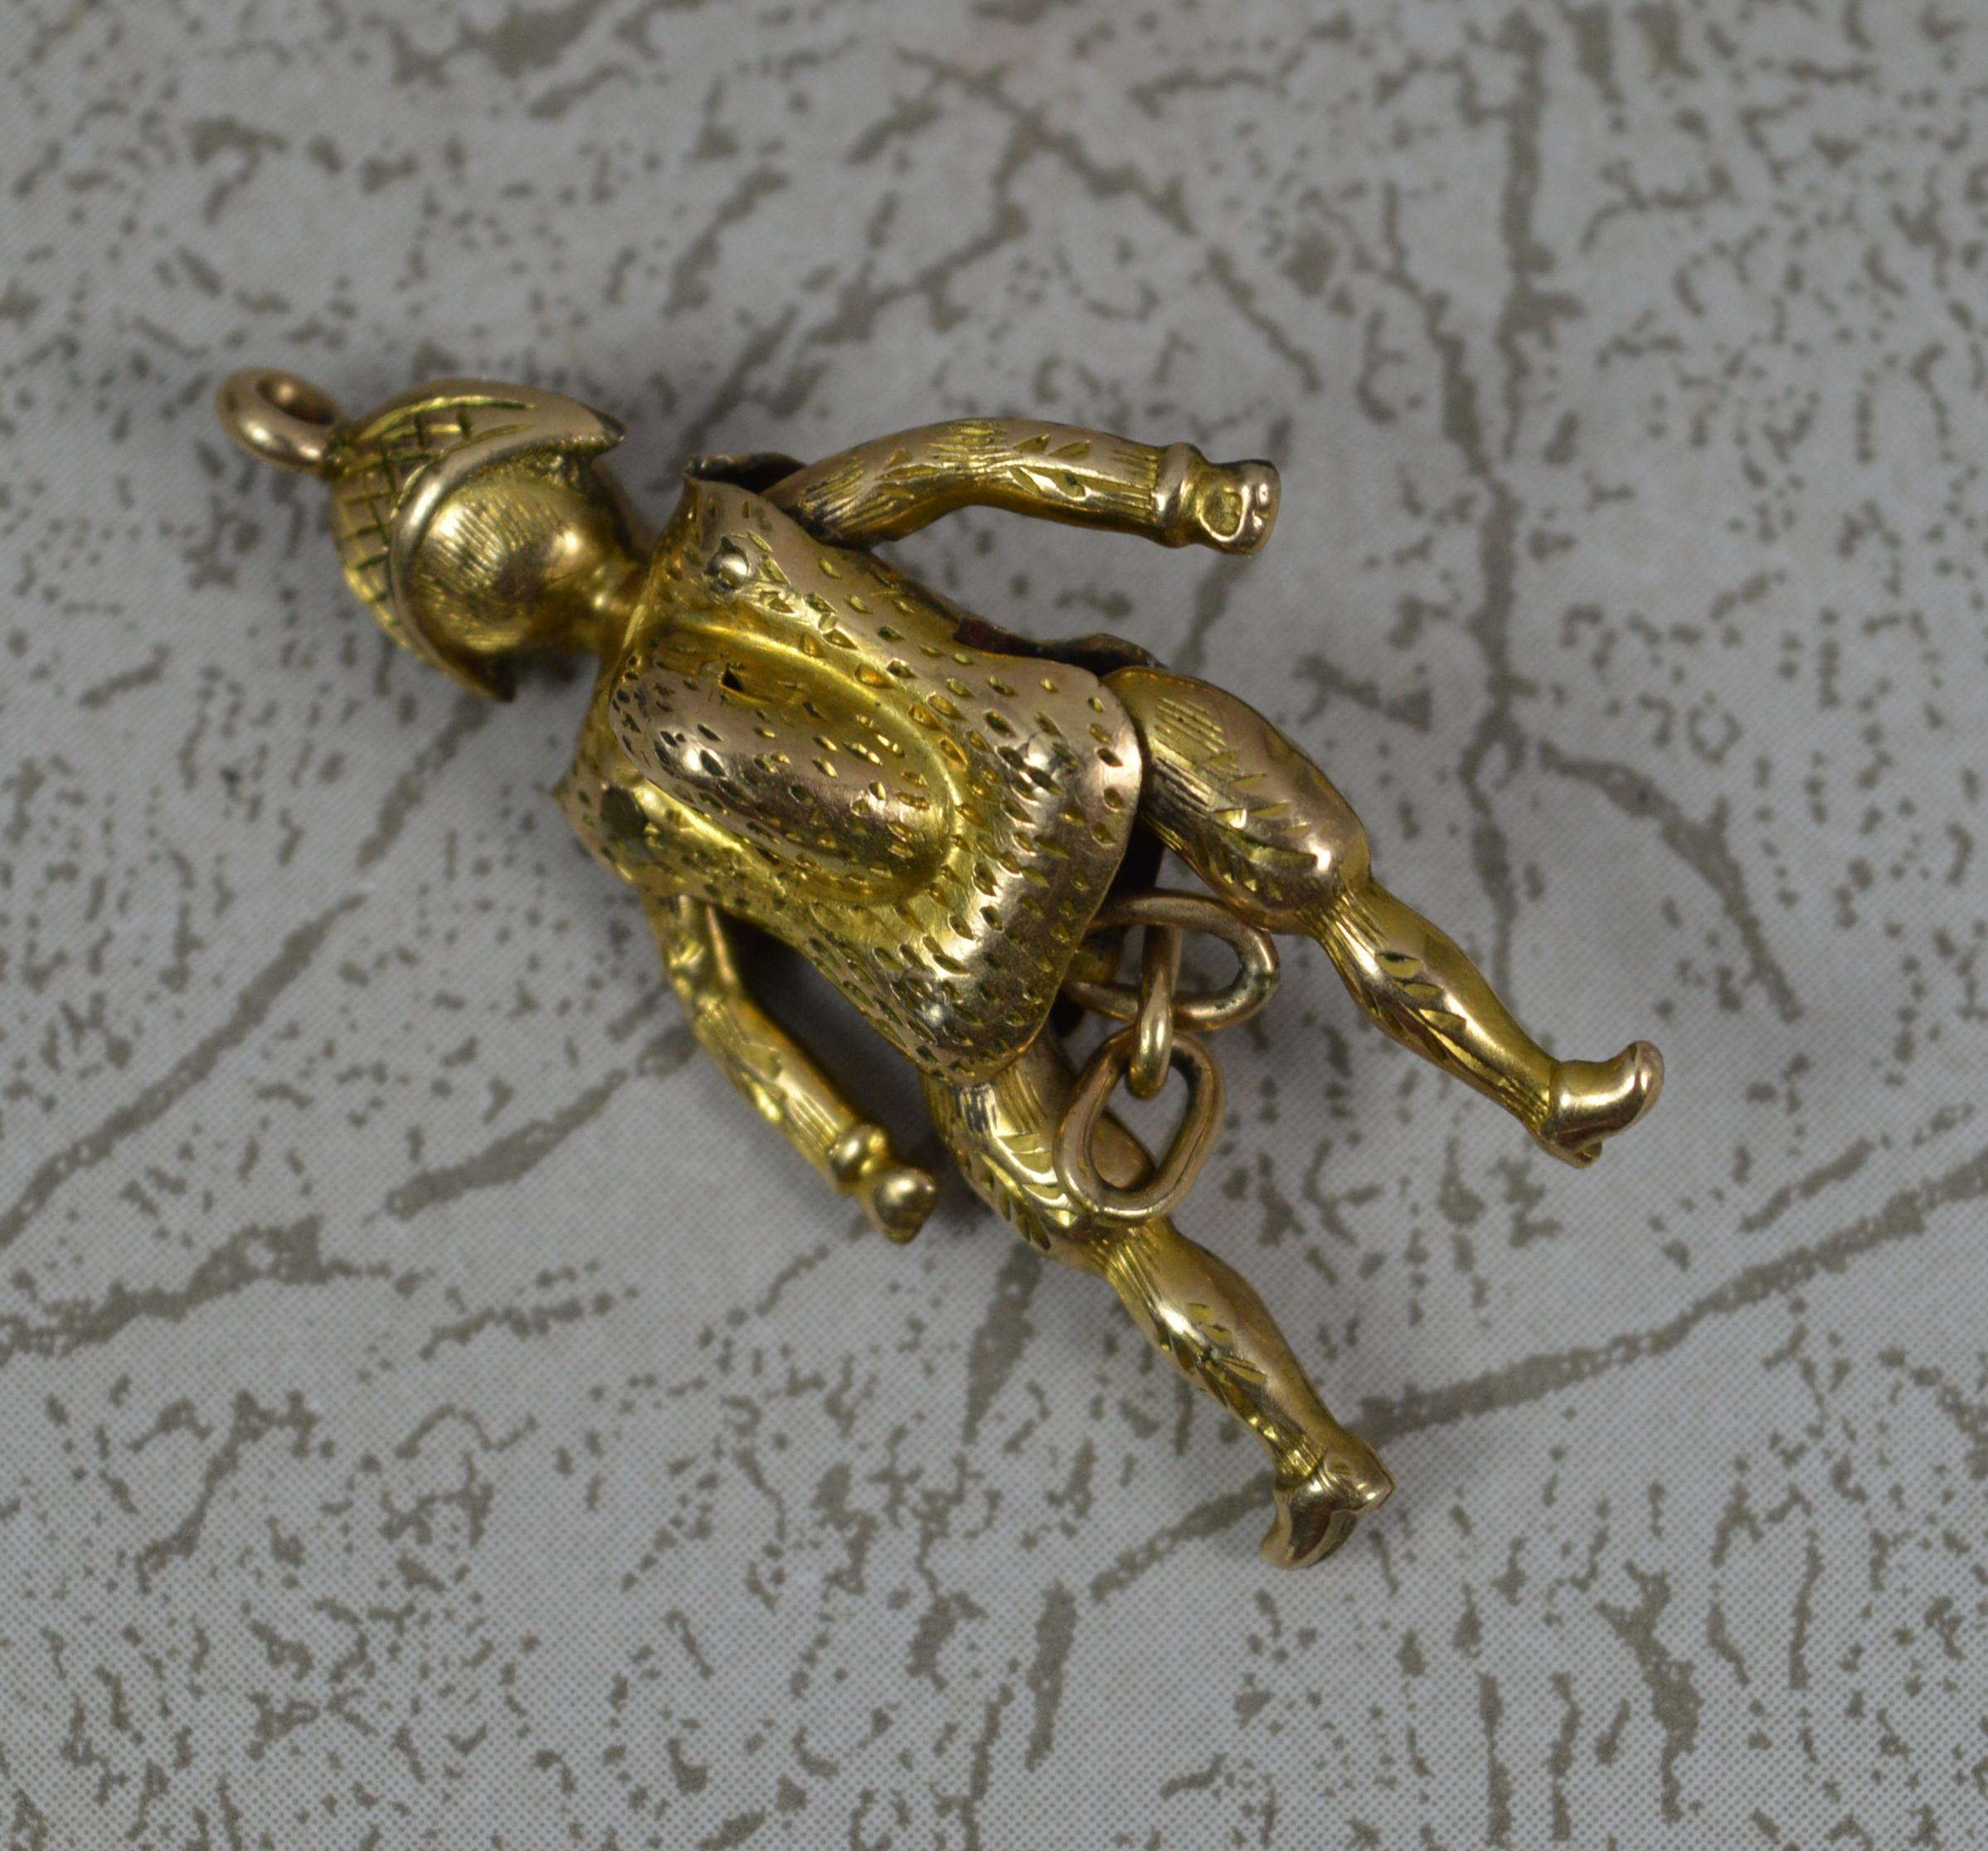 A highly unusual novelty charm pendant.
True Victorian example c1880.
Solid 9 carat rose gold example.
Well formed example as a jester or harlequin.
Articulated design whereby the links between the legs can be pulled down and the arms and legs open